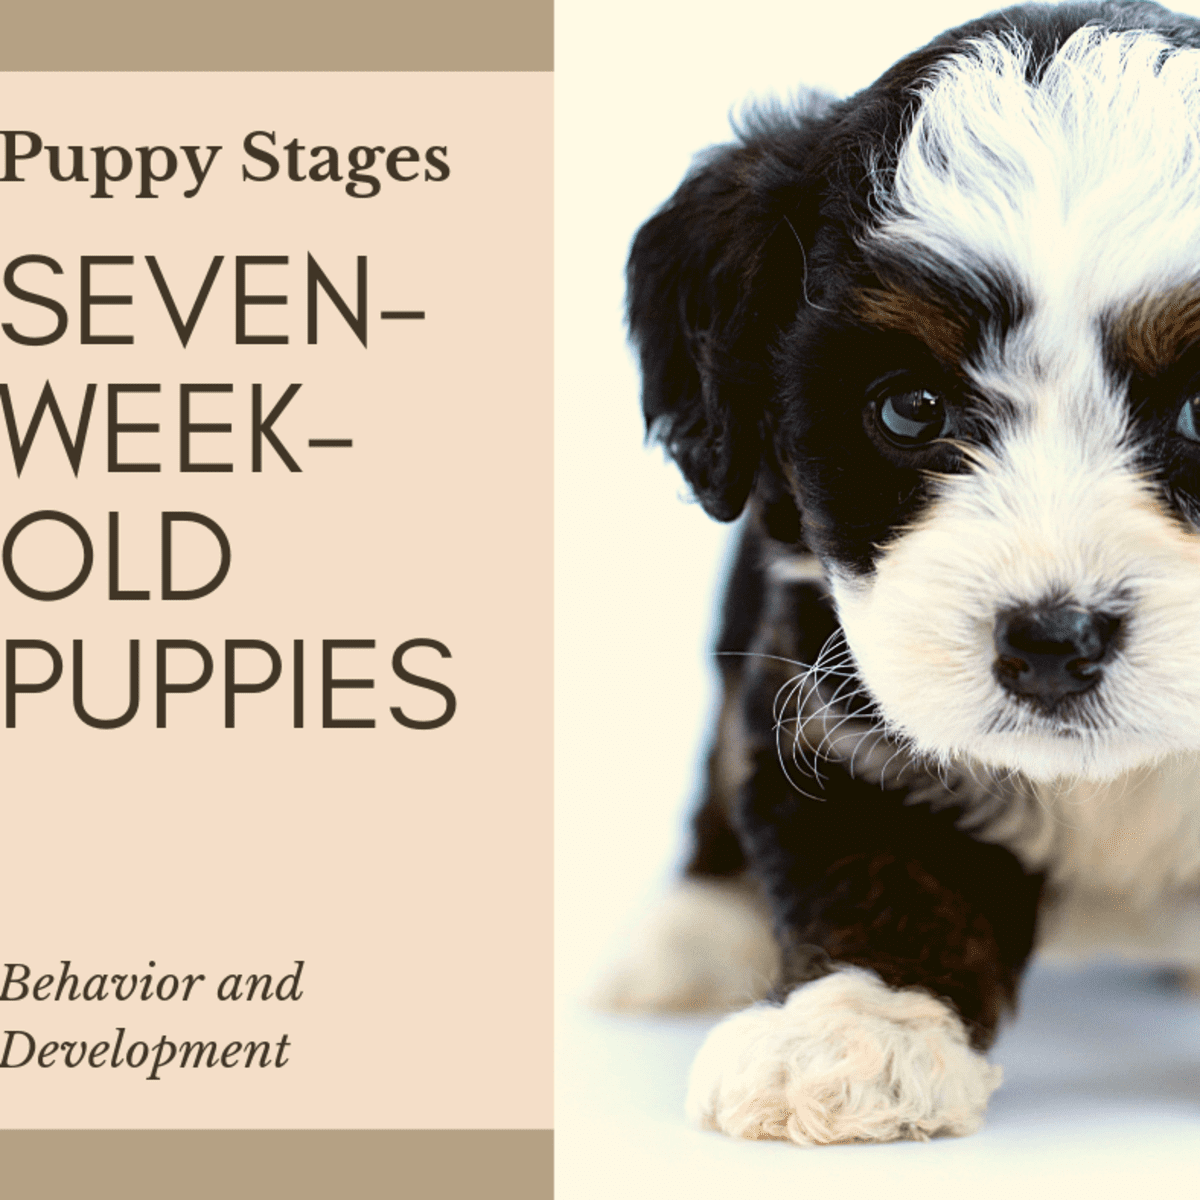 can a puppy be taken at 6 weeks